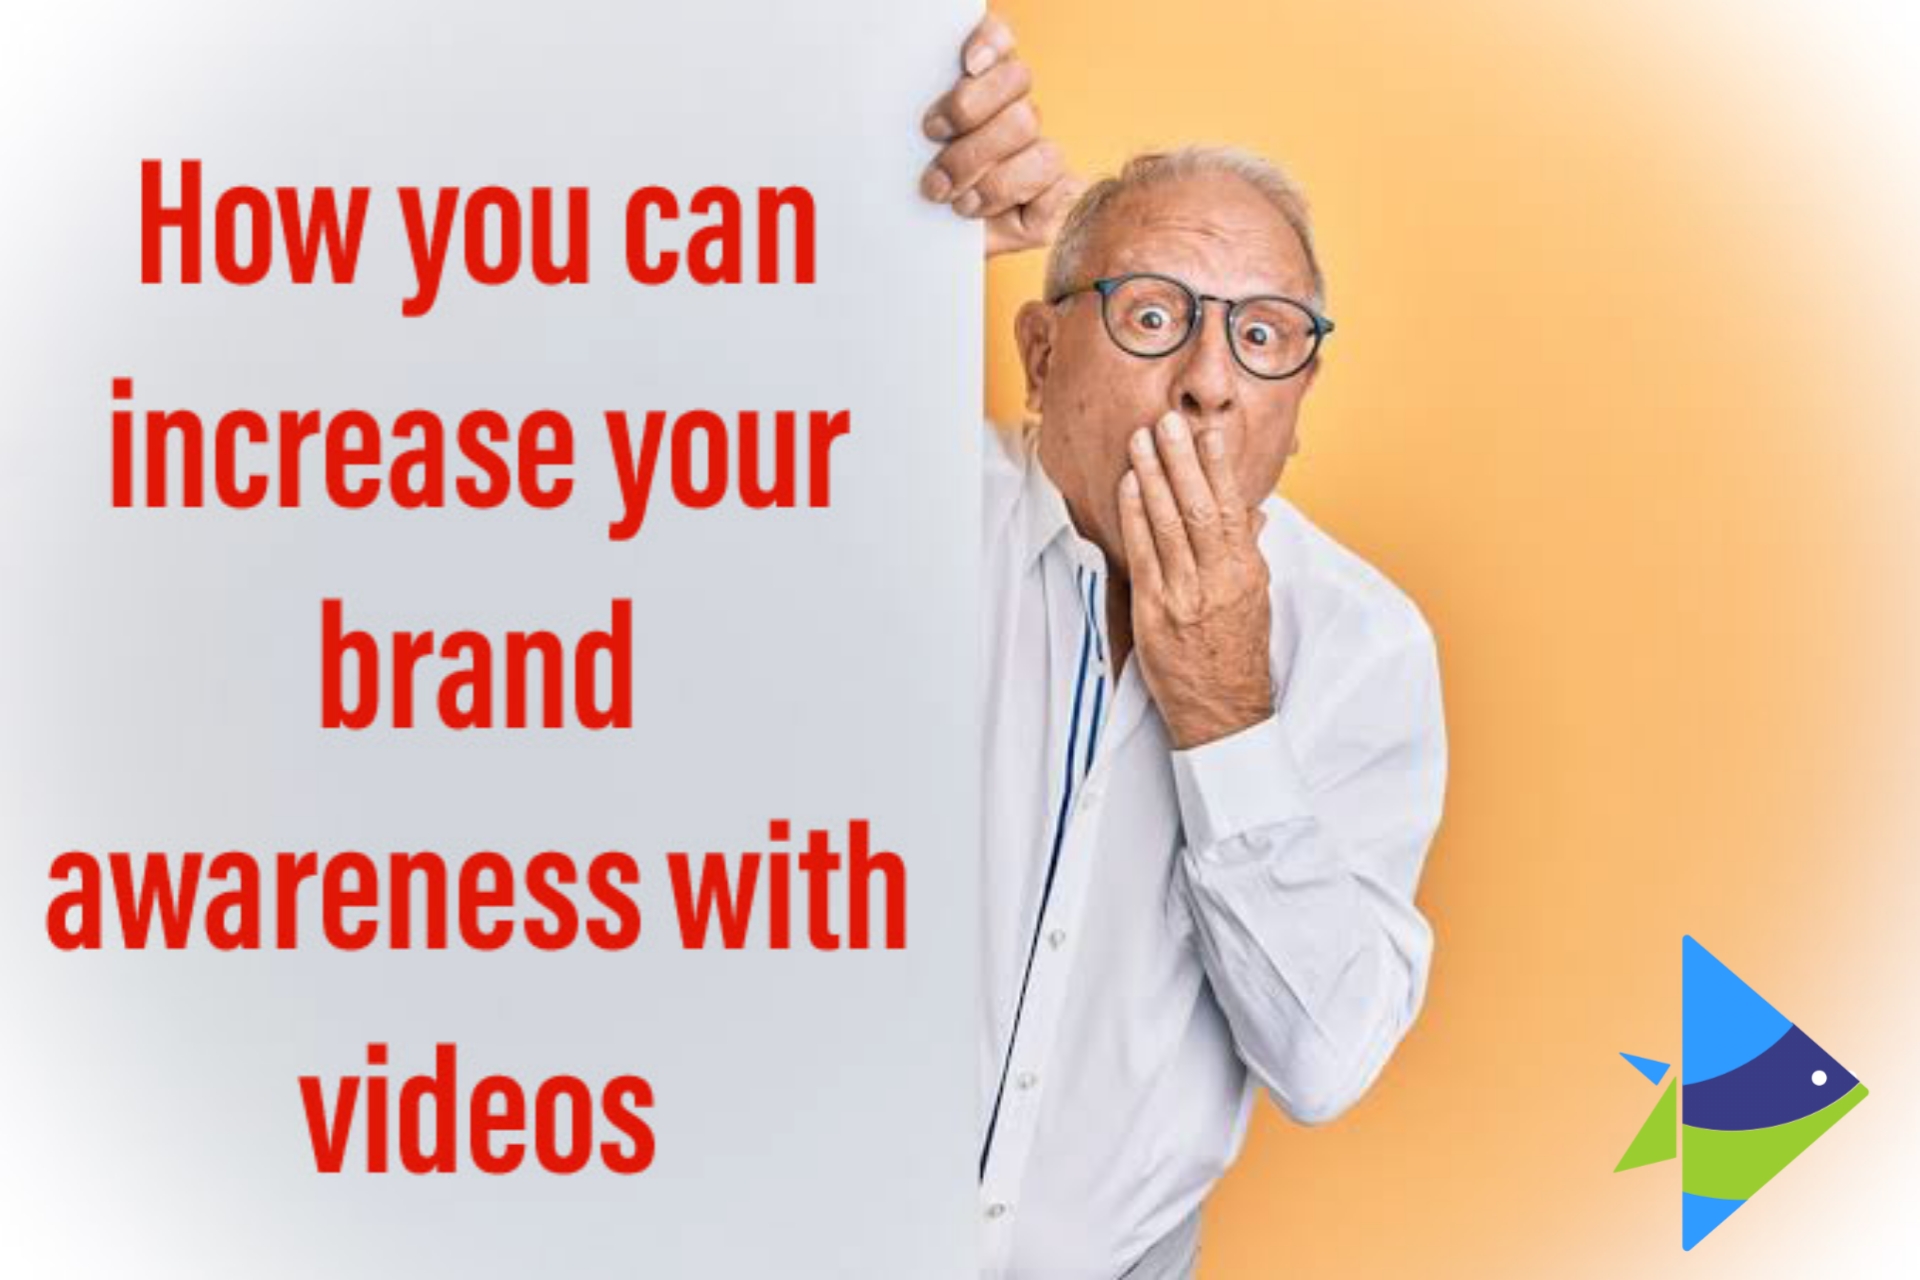 How You Can Increase Your Brand Awareness With Videos